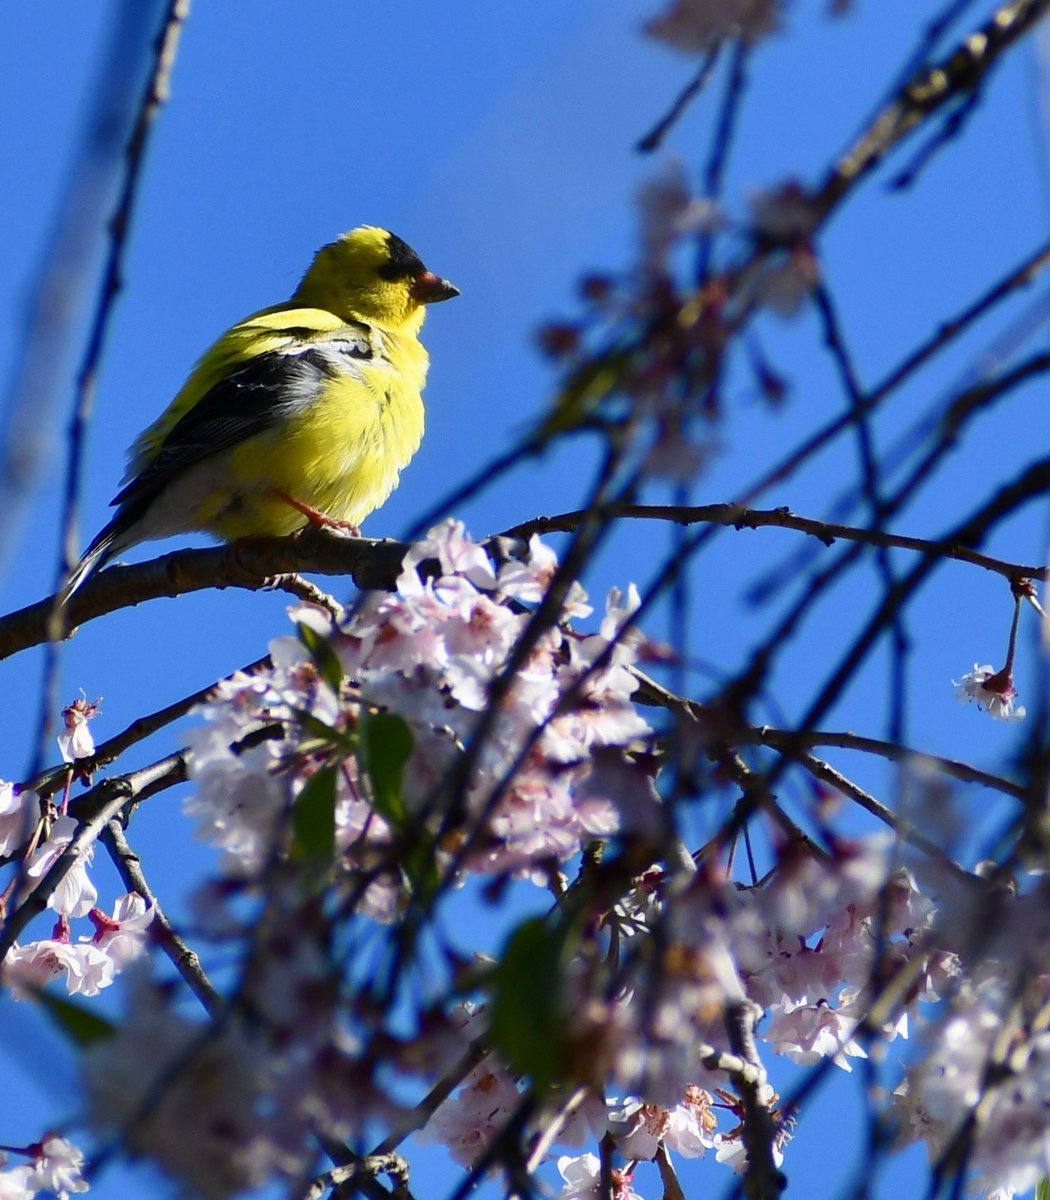 American Goldfinch in the cherry willow 
#birdphotography 🌸